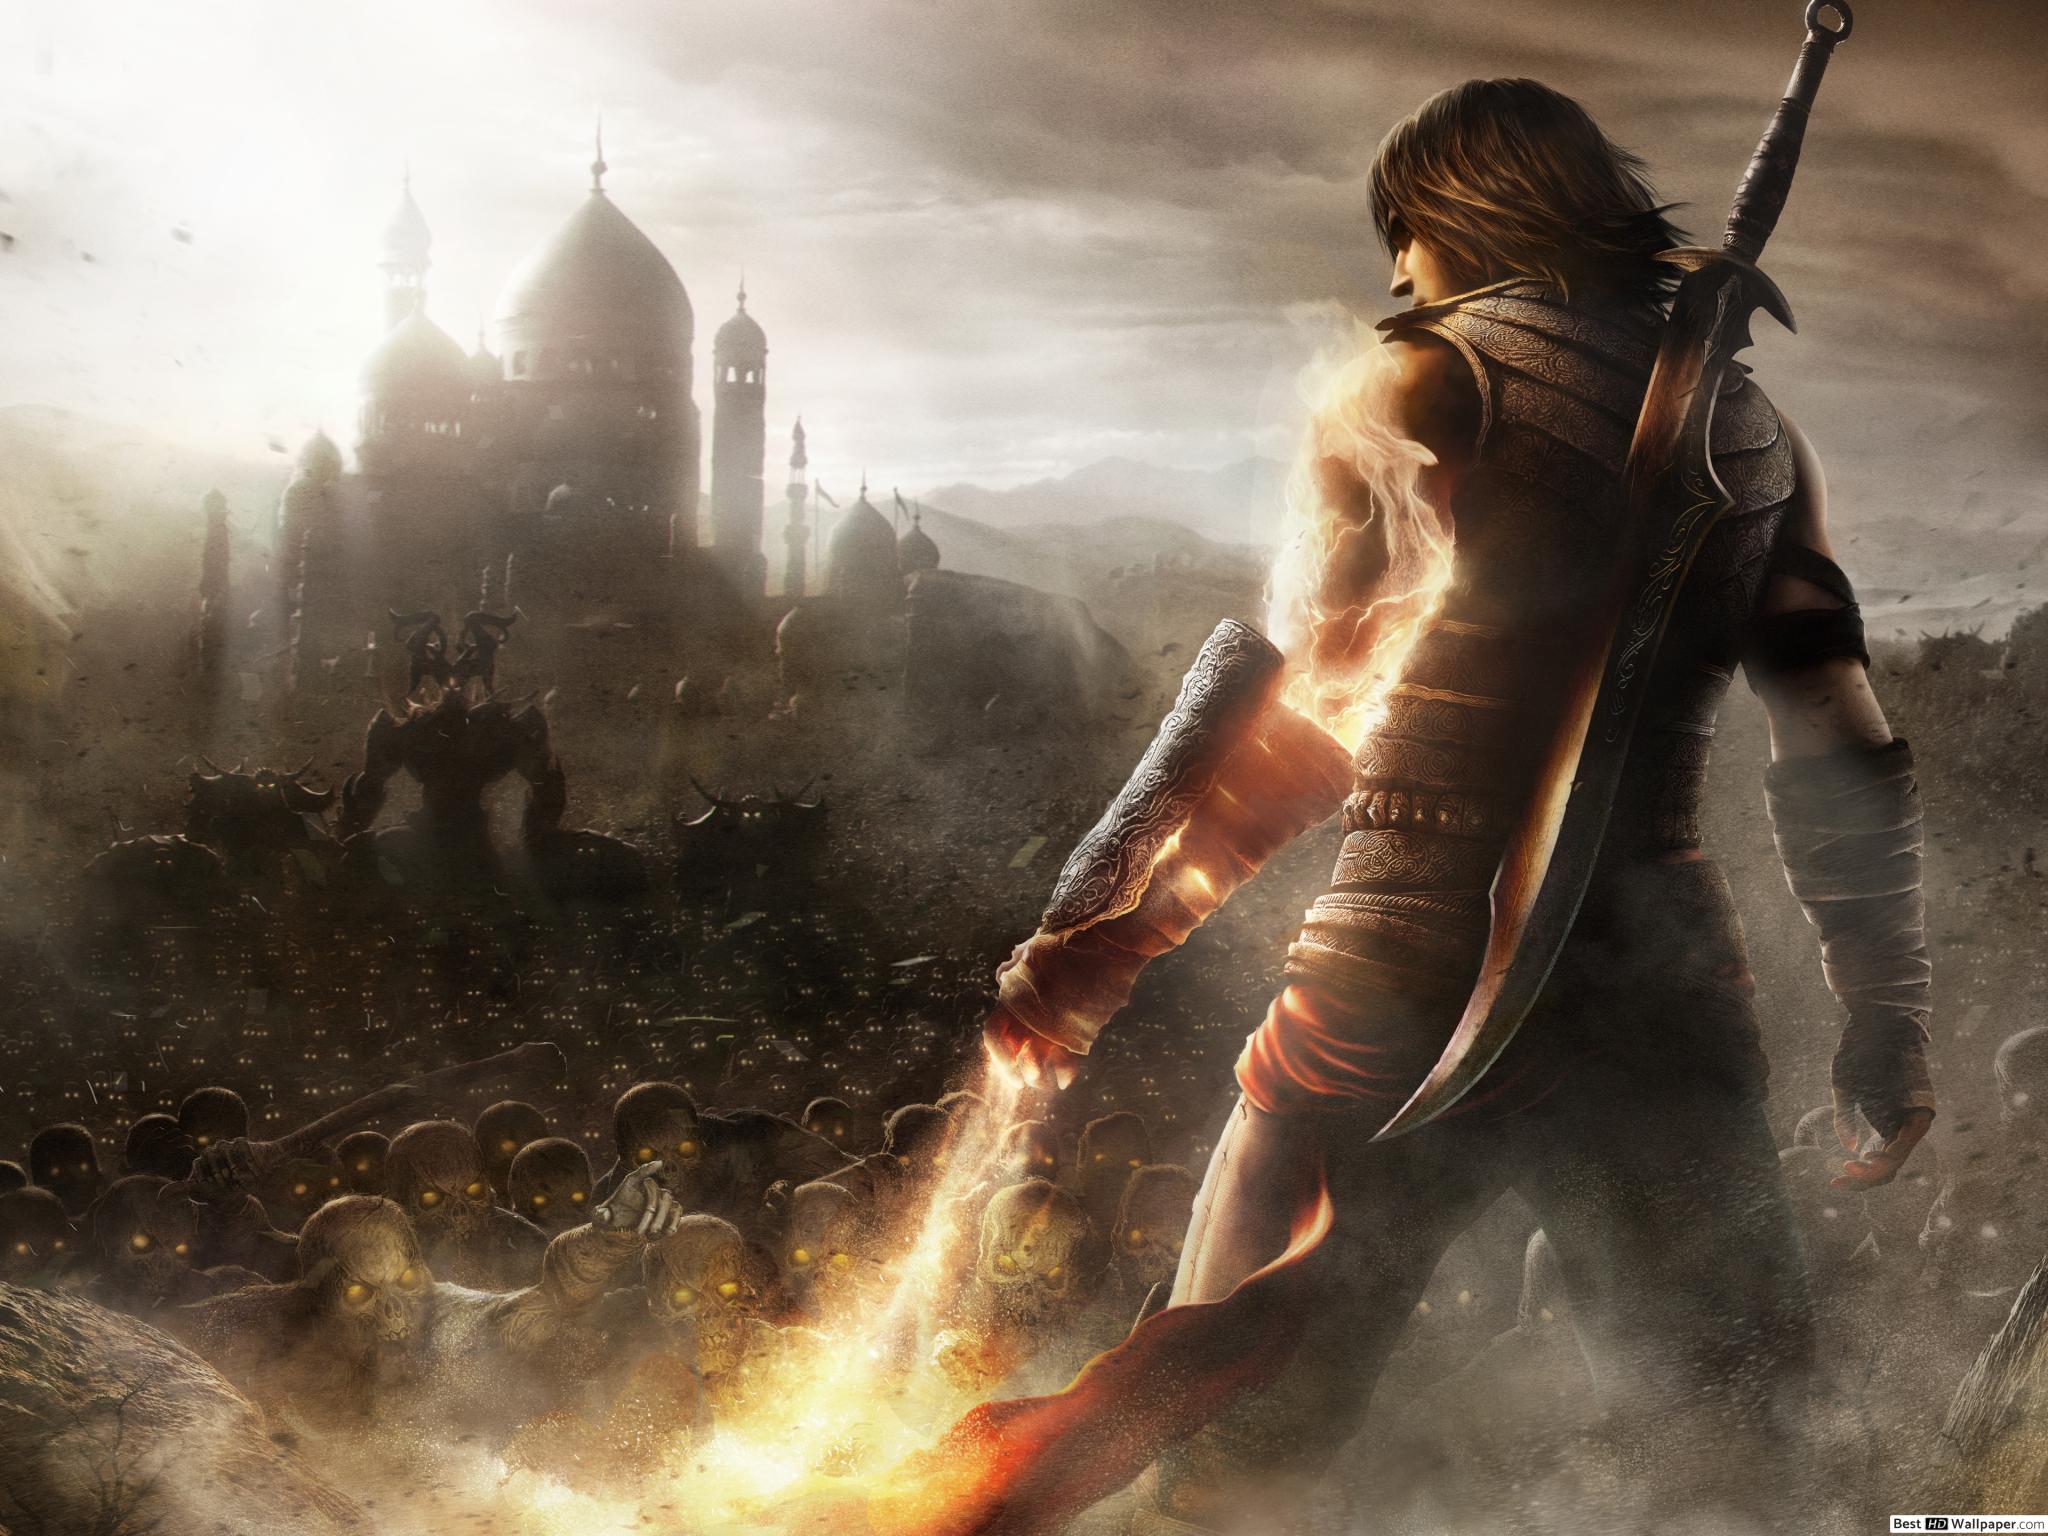 Prince of Persia: The Forgotten Sands HD wallpaper download